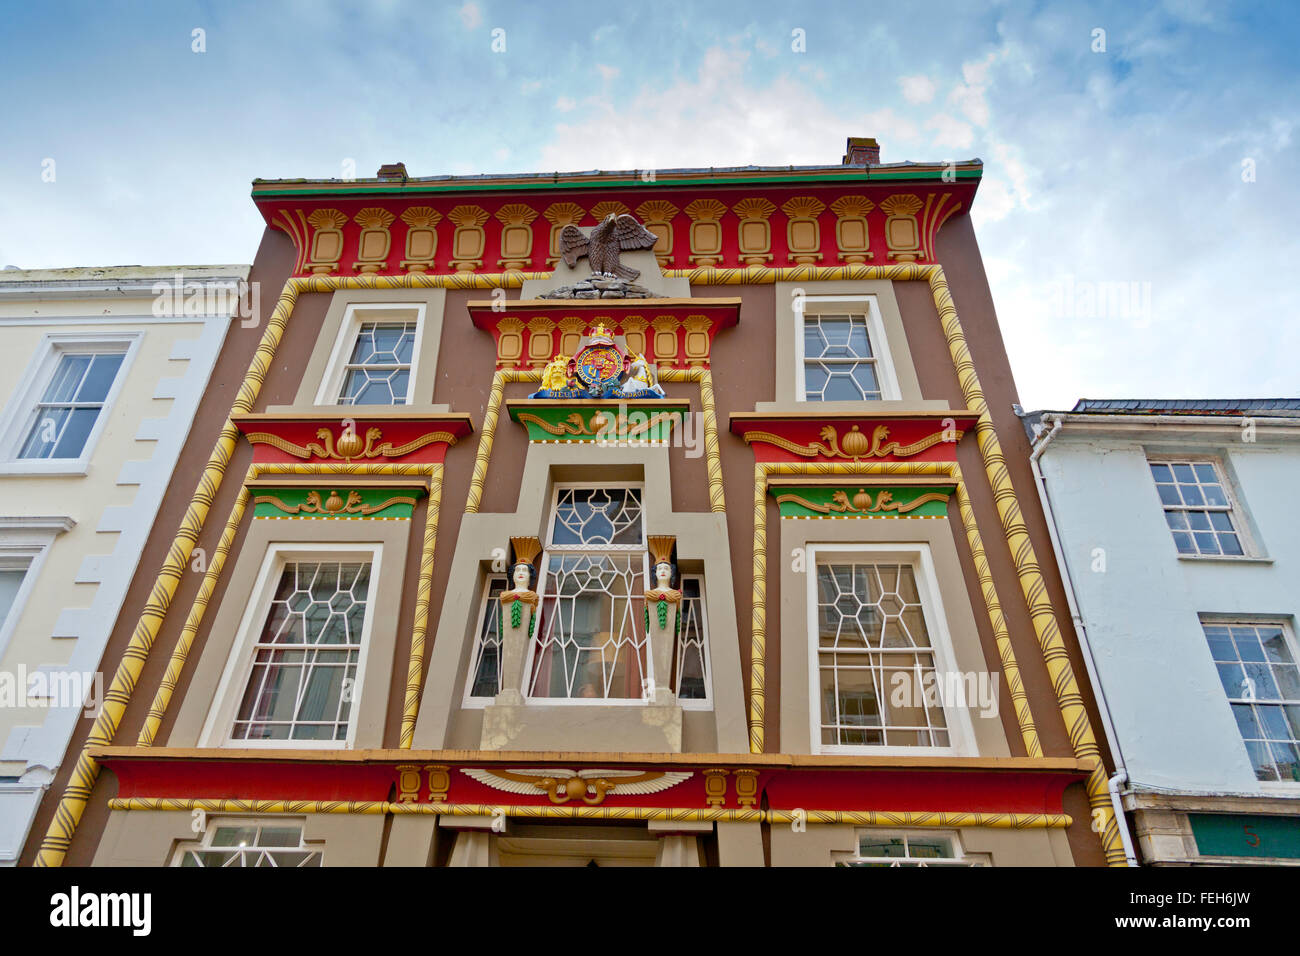 The dramatic and colourful architecture of the Egyptian House owned by The Landmark Trust in Penzance, Cornwall, England, UK Stock Photo